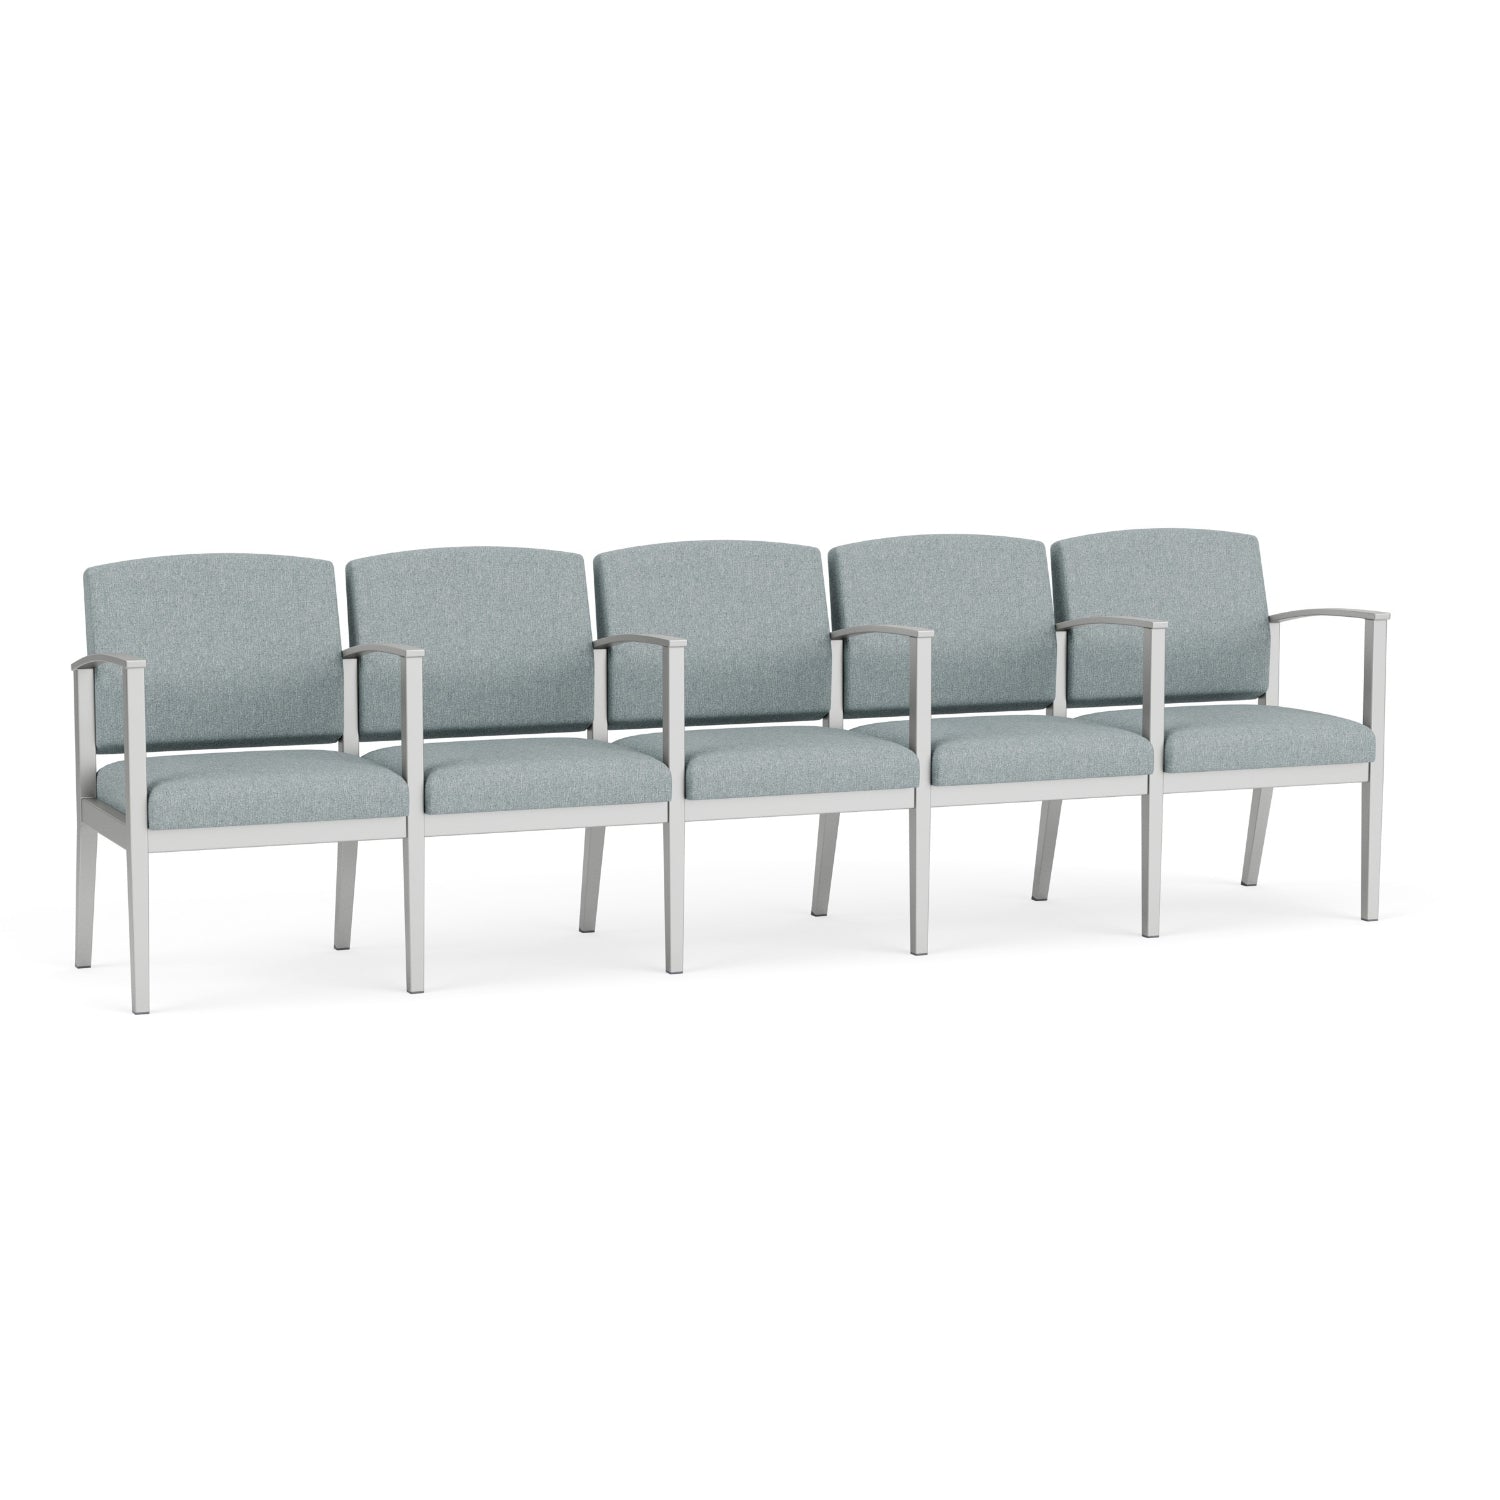 Amherst Steel Collection Reception Seating, 5 Seats with Center Arms, Healthcare Vinyl Upholstery, FREE SHIPPING